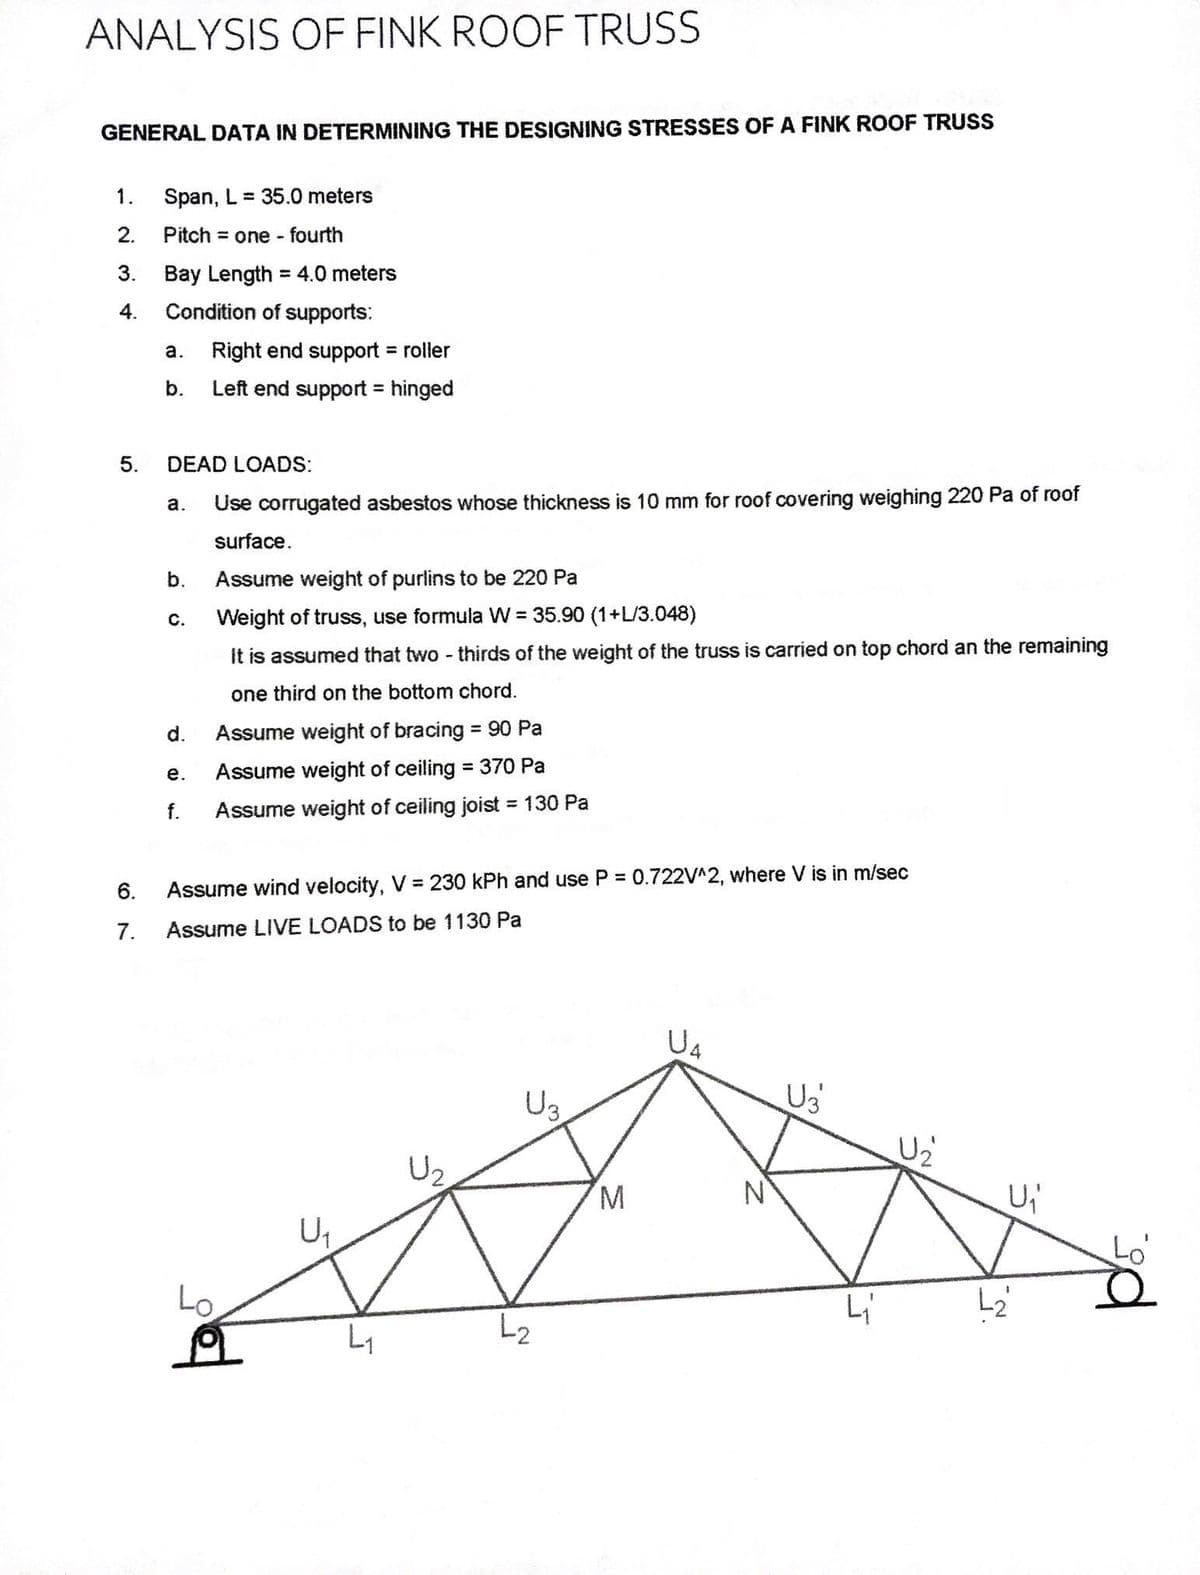 ANALYSIS OF FINK ROOF TRUSS
GENERAL DATA IN DETERMINING THE DESIGNING STRESSES OF A FINK ROOF TRUSS
1. Span, L= 35.0 meters
Pitch = one-fourth
Bay Length = 4.0 meters
Condition of supports:
2.
3.
4.
5.
6.
7.
a. Right end support = roller
b.
Left end support = hinged
DEAD LOADS:
a. Use corrugated asbestos whose thickness is 10 mm for roof covering weighing 220 Pa of roof
surface.
Assume weight of purlins to be 220 Pa
Weight of truss, use formula W = 35.90 (1+L/3.048)
It is assumed that two-thirds of the weight of the truss is carried on top chord an the remaining
one third on the bottom chord.
Assume weight of bracing = 90 Pa
Assume weight of ceiling = 370 Pa
Assume weight of ceiling joist = 130 Pa
b.
C.
d.
e.
f.
Assume wind velocity, V = 230 kPh and use P = 0.722V^2, where V is in m/sec
Assume LIVE LOADS to be 1130 Pa
Lo
U₁
L₁
U₂
U₂
L2
M
U4
U₂
L₁
U₂
U₁
L₂
pr